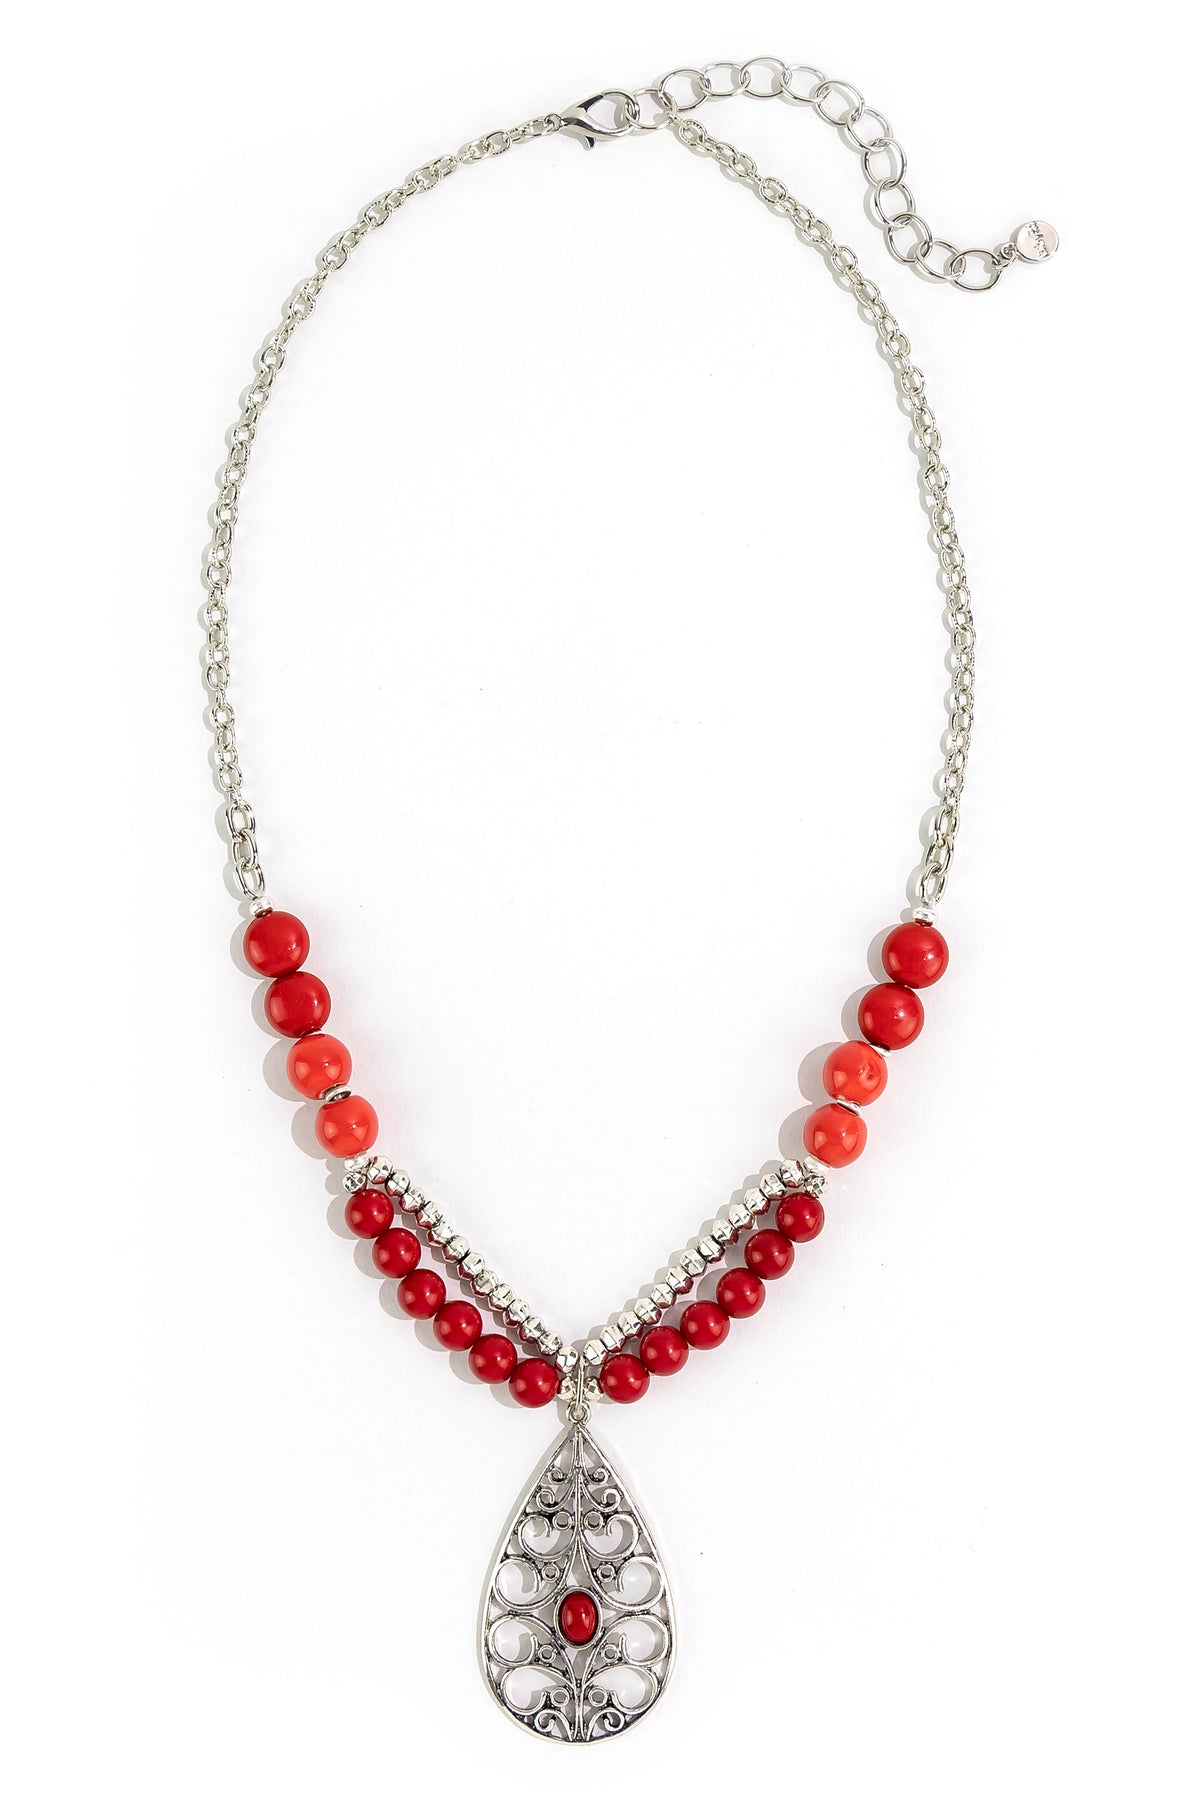 Ruby Rd. Red Teardrop Pendant Necklace